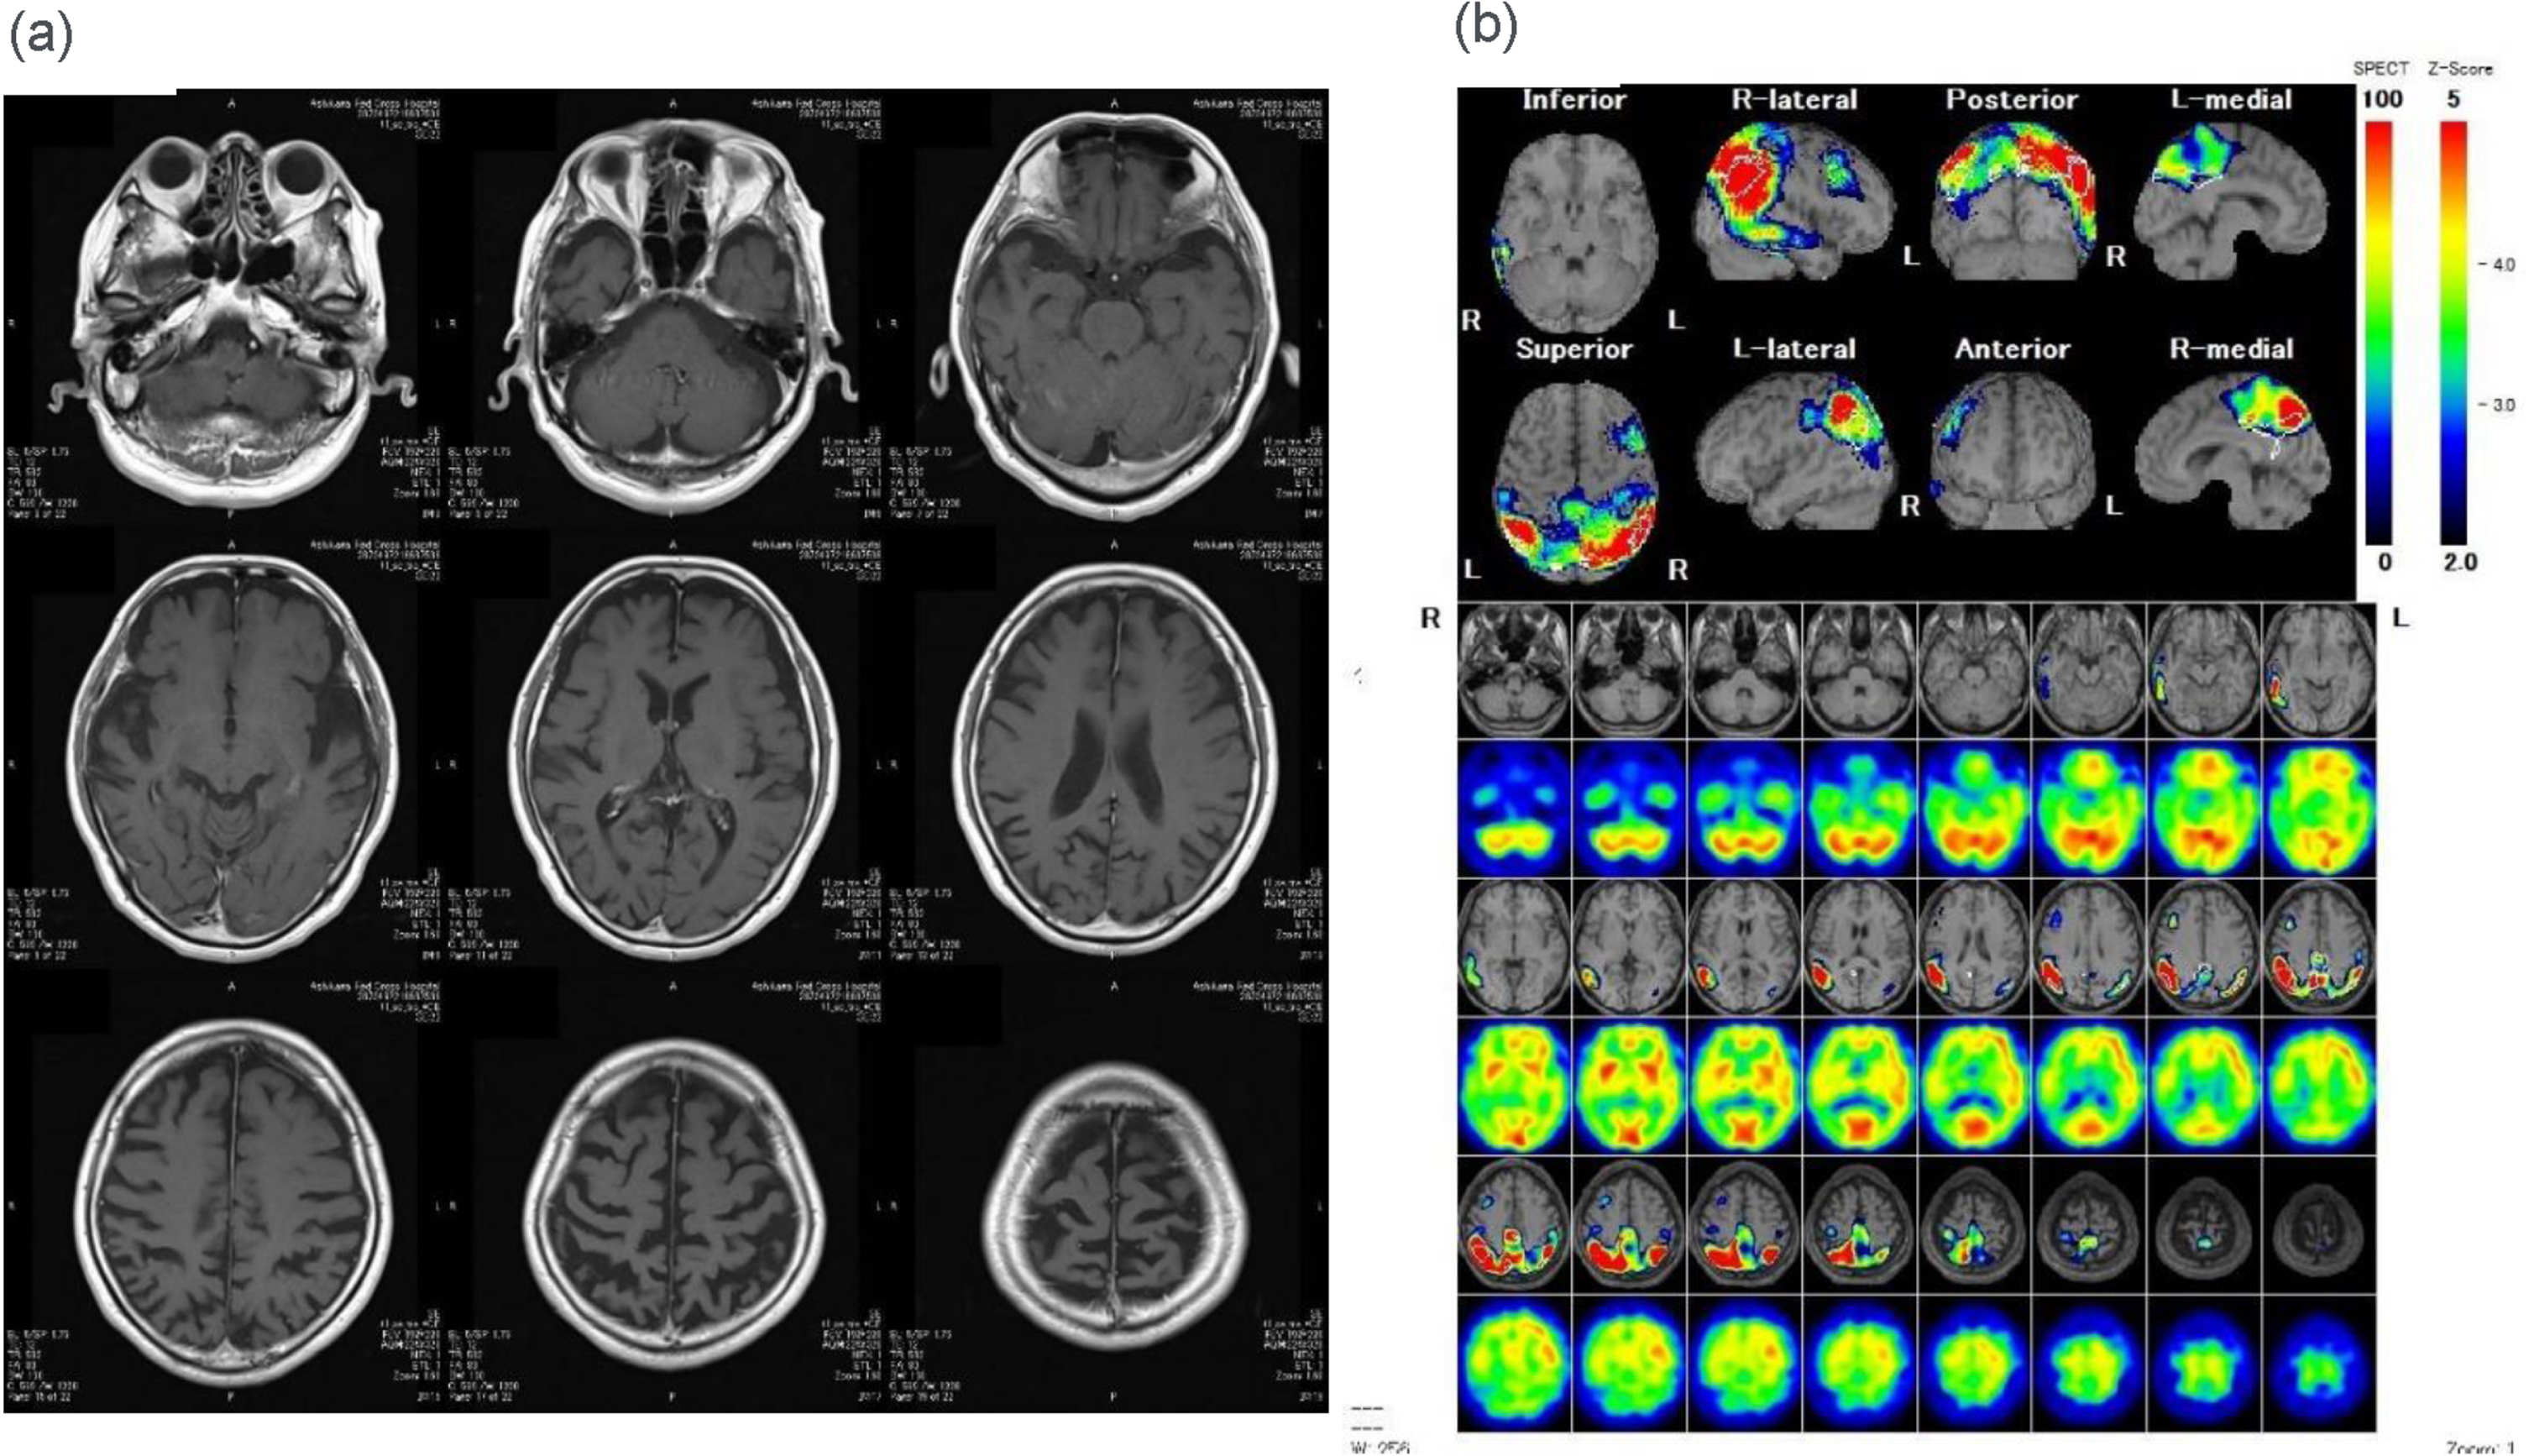 Brain images at 62 years. (a) Fluid-attenuated inversion recovery (FLAIR) magnetic resonance imaging of the individual’s head shows diffuse atrophy with a predominance in the right parietal lobe. (b) Brain 99mTc-ethyl cysteinate dimer (99mTc-ECD) single-photon emission computed tomography (SPECT) imaging of the head and the eZIS analysis shows relative hypoperfusion in the right parietal lobe.